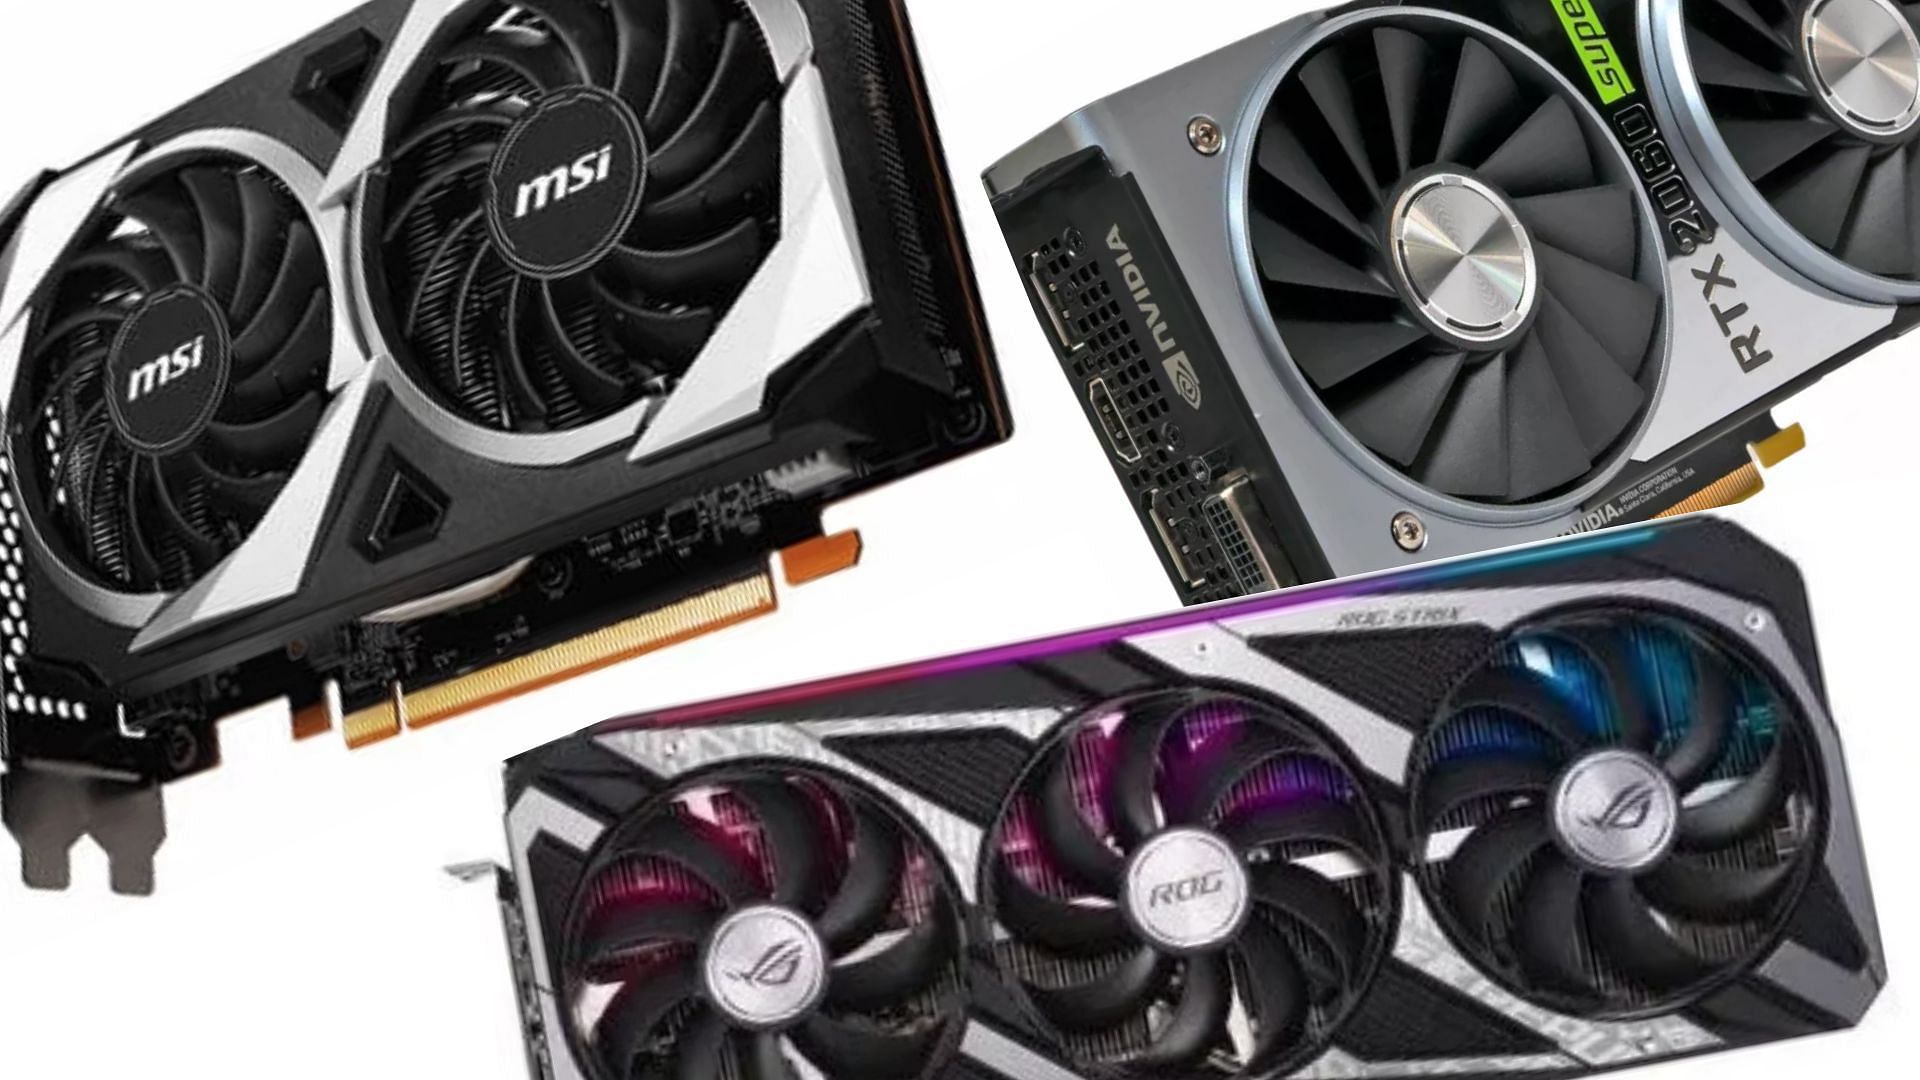 Multiple graphics cards are available for under $300 today (Image via Sportskeeda)